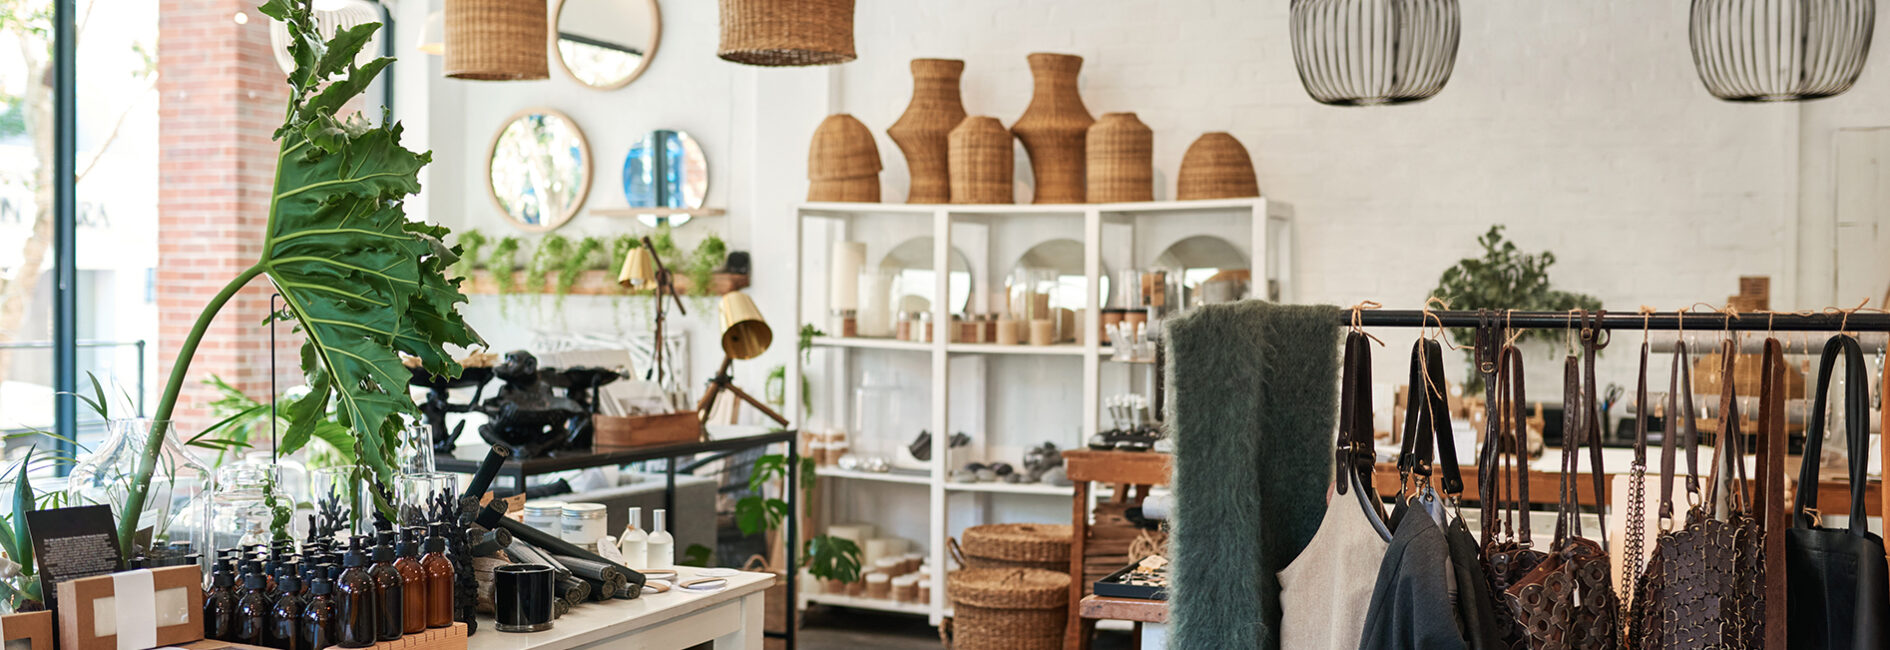 Interior of a stylish shop selling an assortment of items